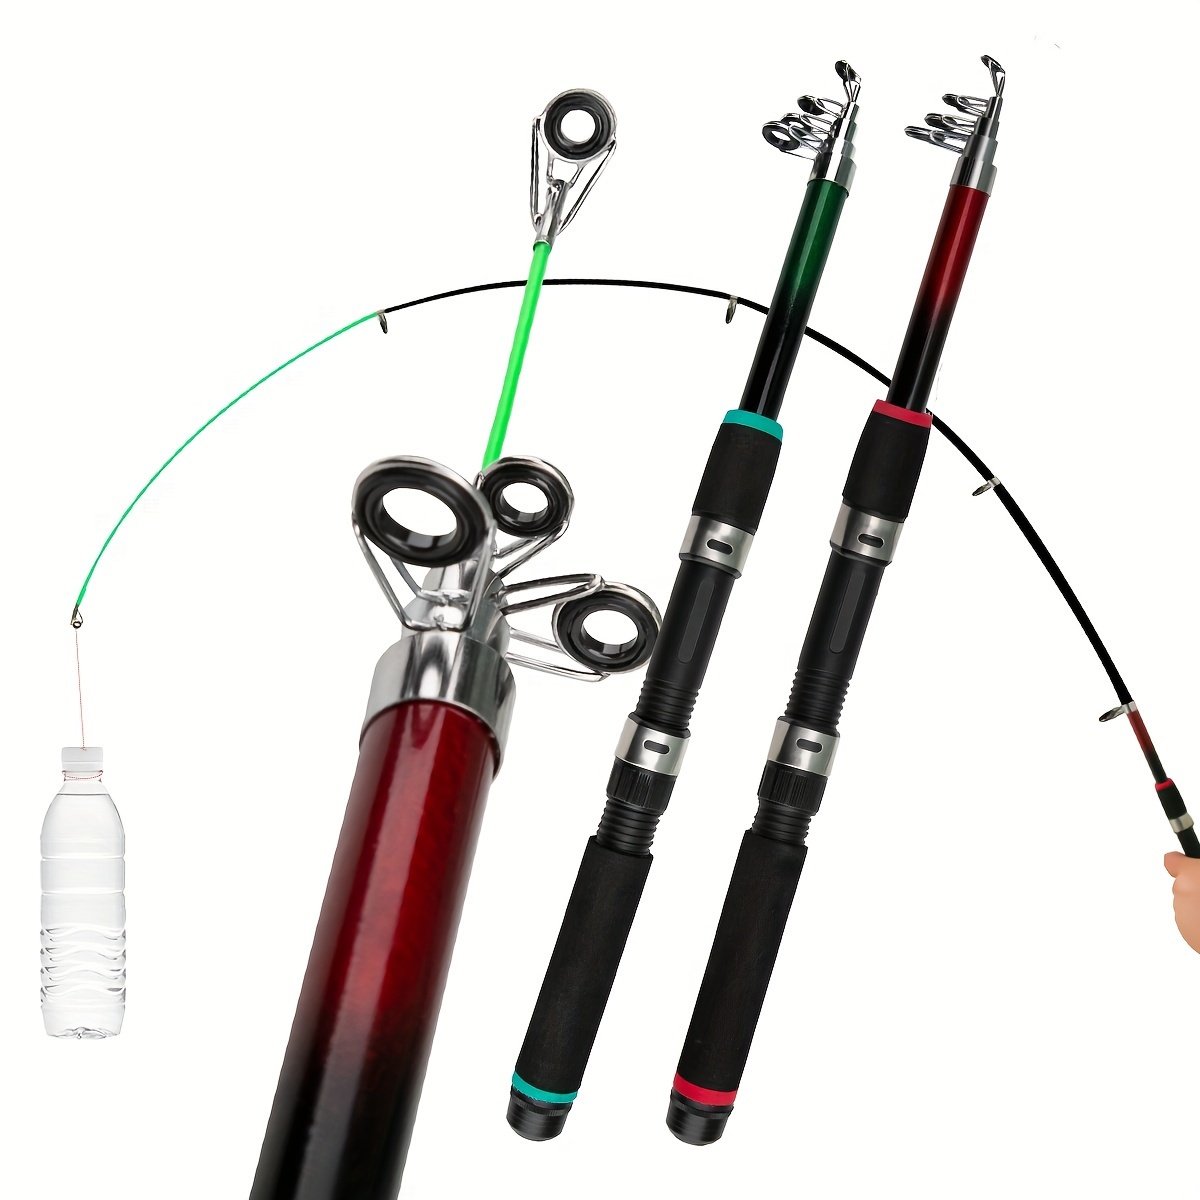 

Portable Telescopic Fishing Rod, Lightweight, Red/green, Durable Carbon Fiber, Easy-grip, Flexibility For Travel, Retractable Lure Fishing Pole